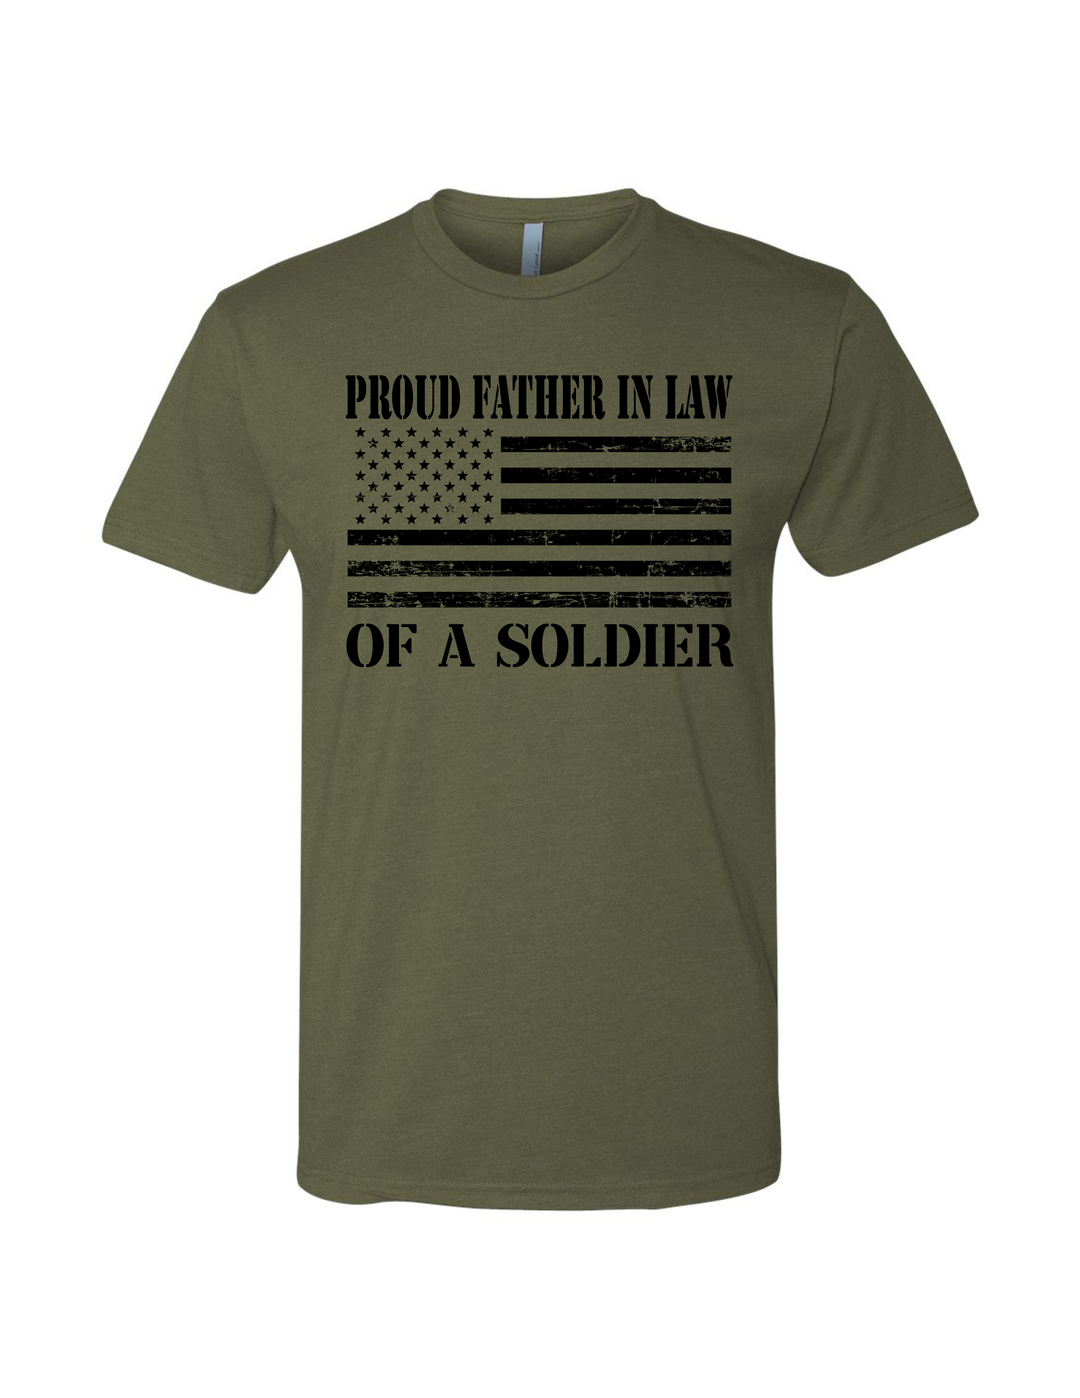 Proud Father in Law of a Soldier T-Shirt (Military Green)